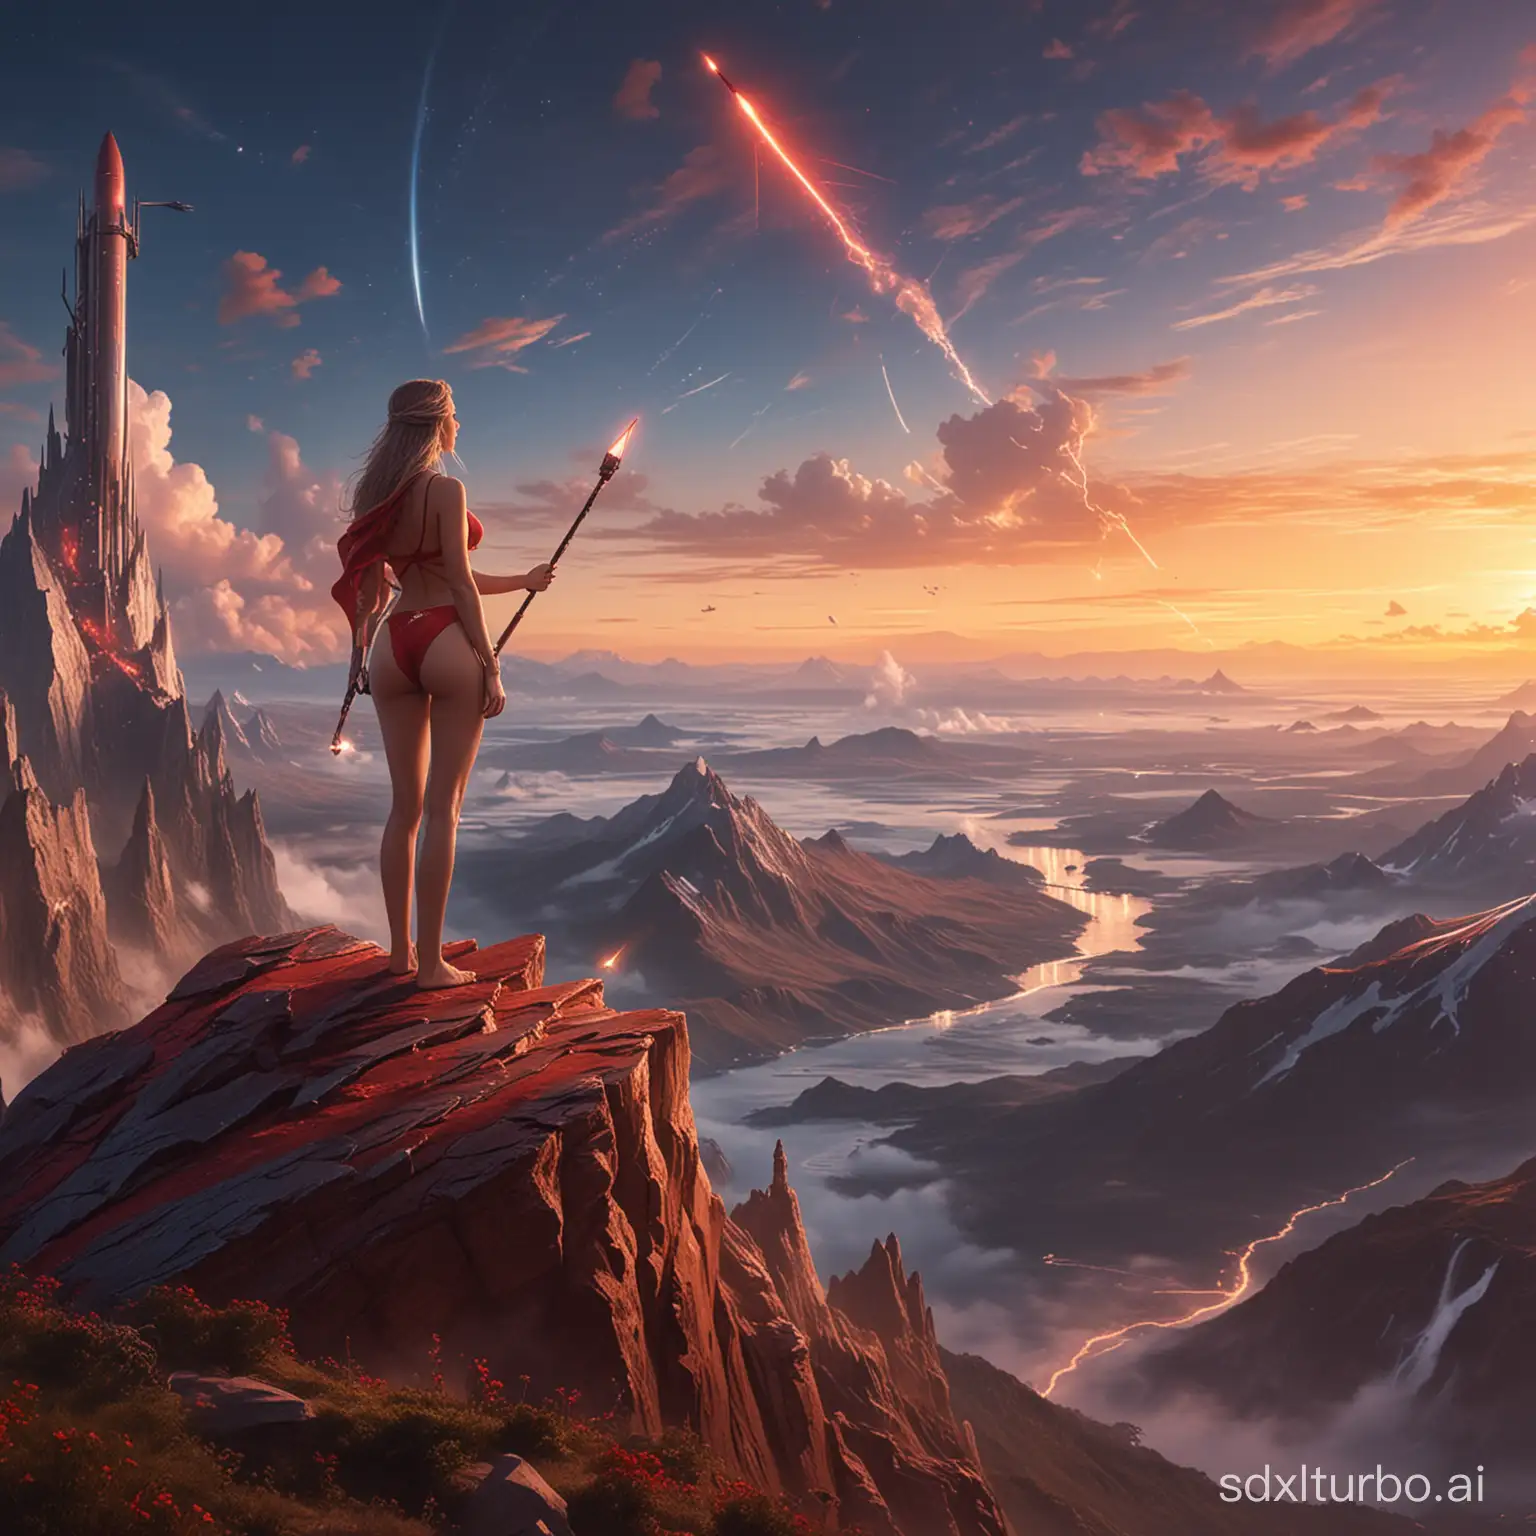 Awesome artwork of a wizard on the top of a mountain, she's creating SpaceX spaceship with magic, magic text, at dawn, sunrise, 18 years old lady standing middle, 36F, red bikini, facing toward.